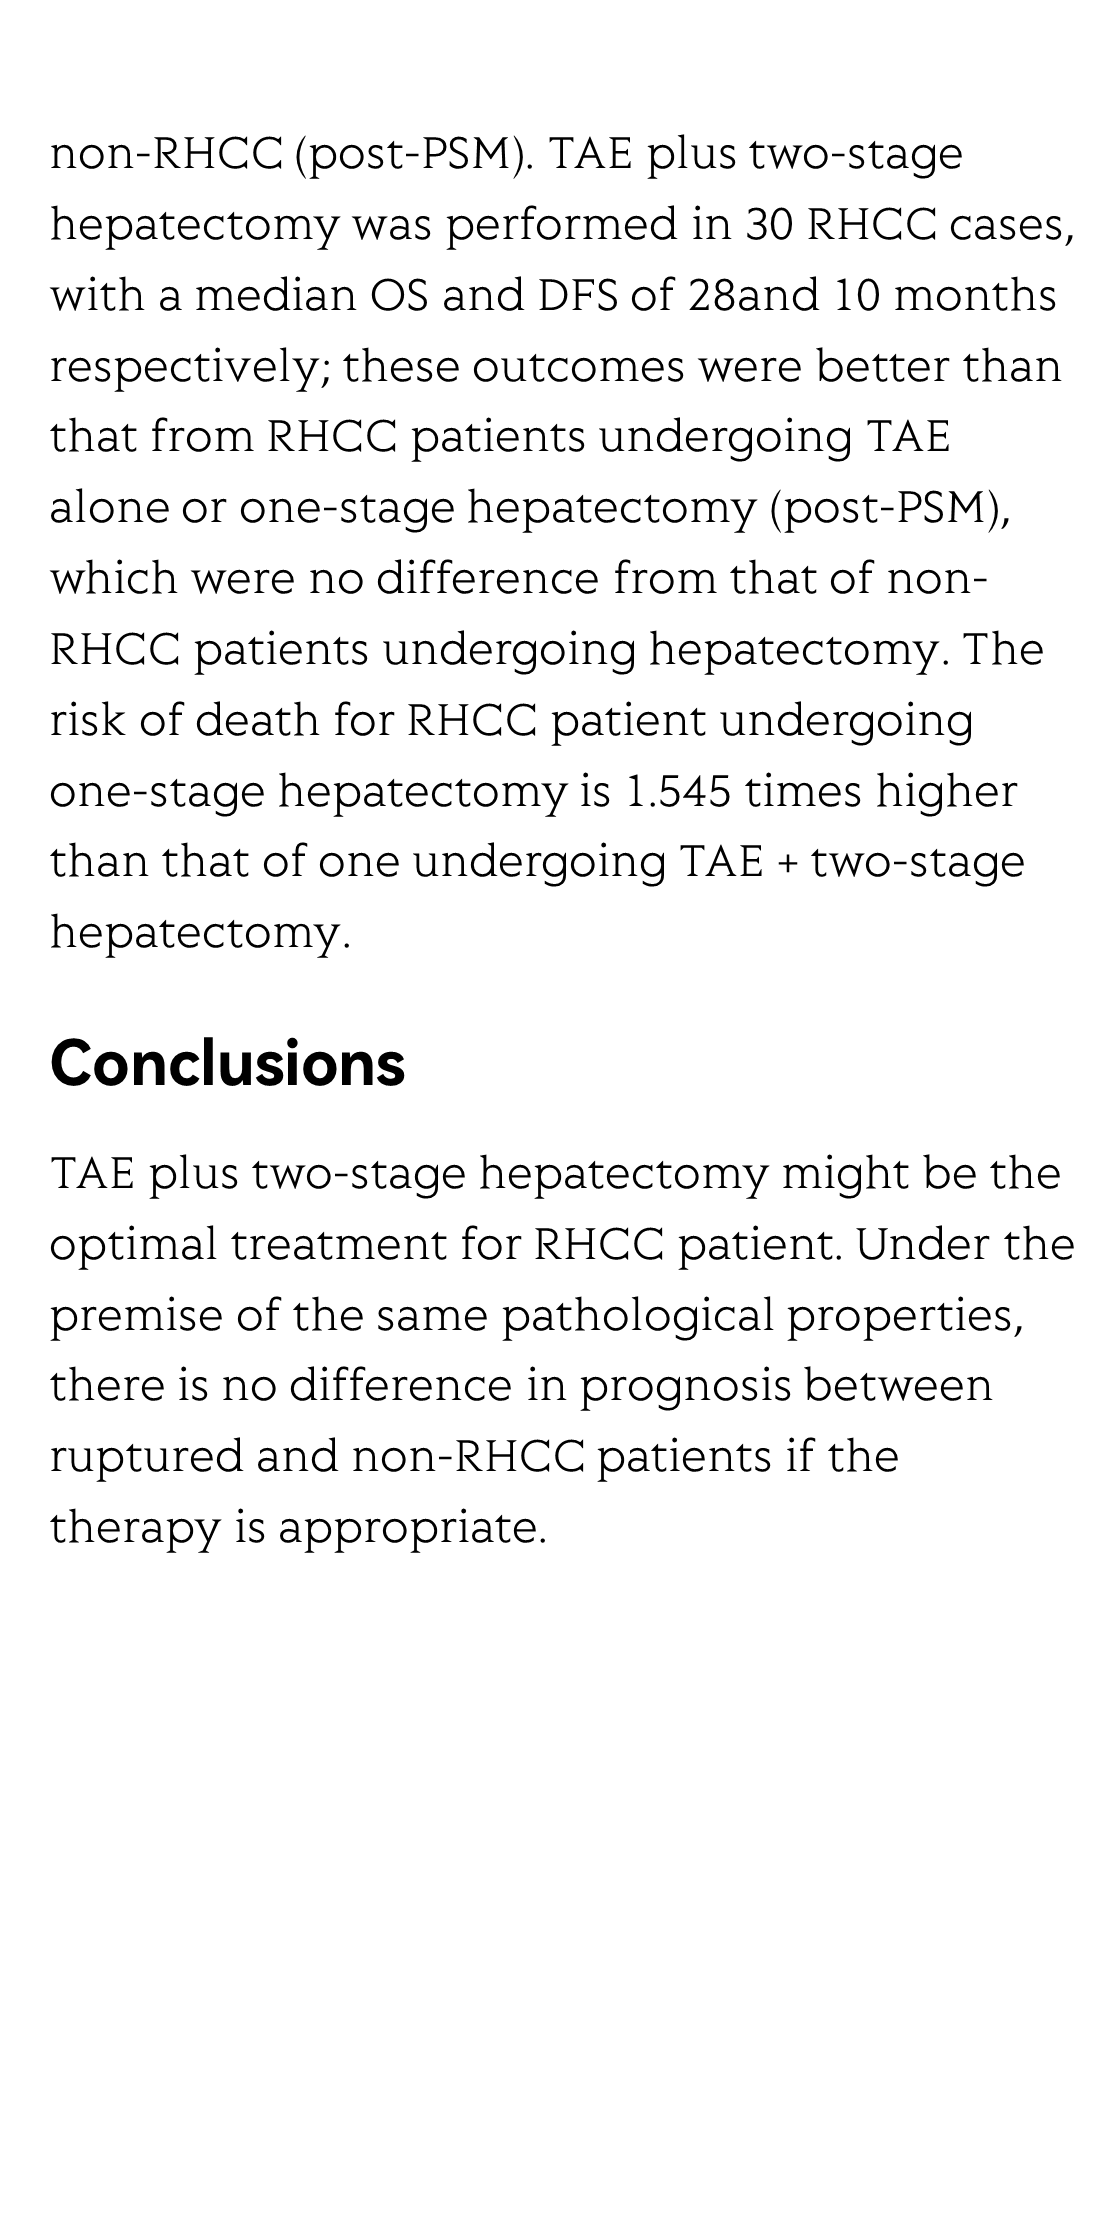 Propensity score matching study of 325 patients with spontaneous rupture of hepatocellular carcinoma_3